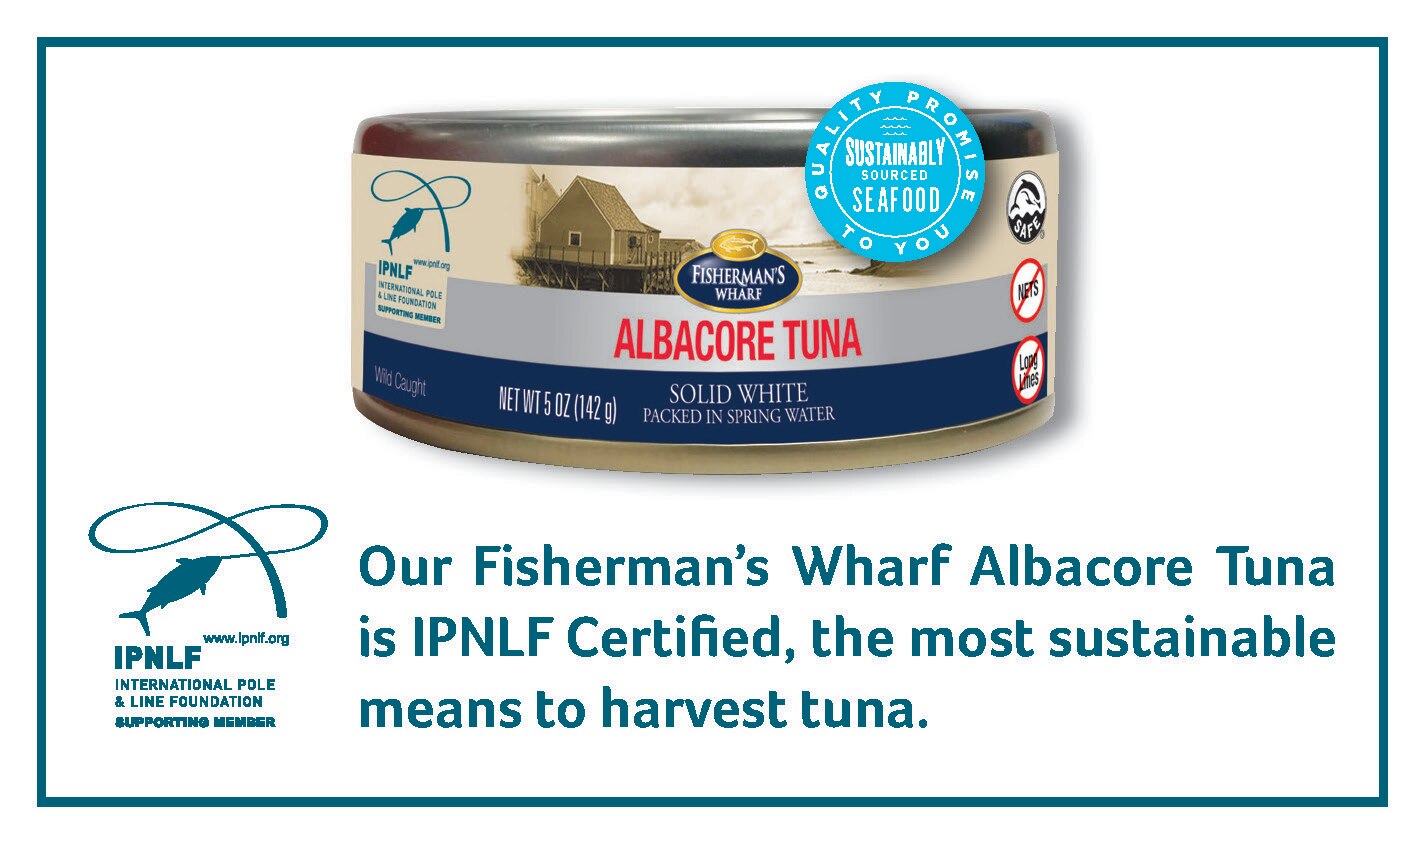 AlbacoreTuna, Our fisherman's wharf albacore tuna is ipnlf certified, the most sustainable means to harvest tuna.